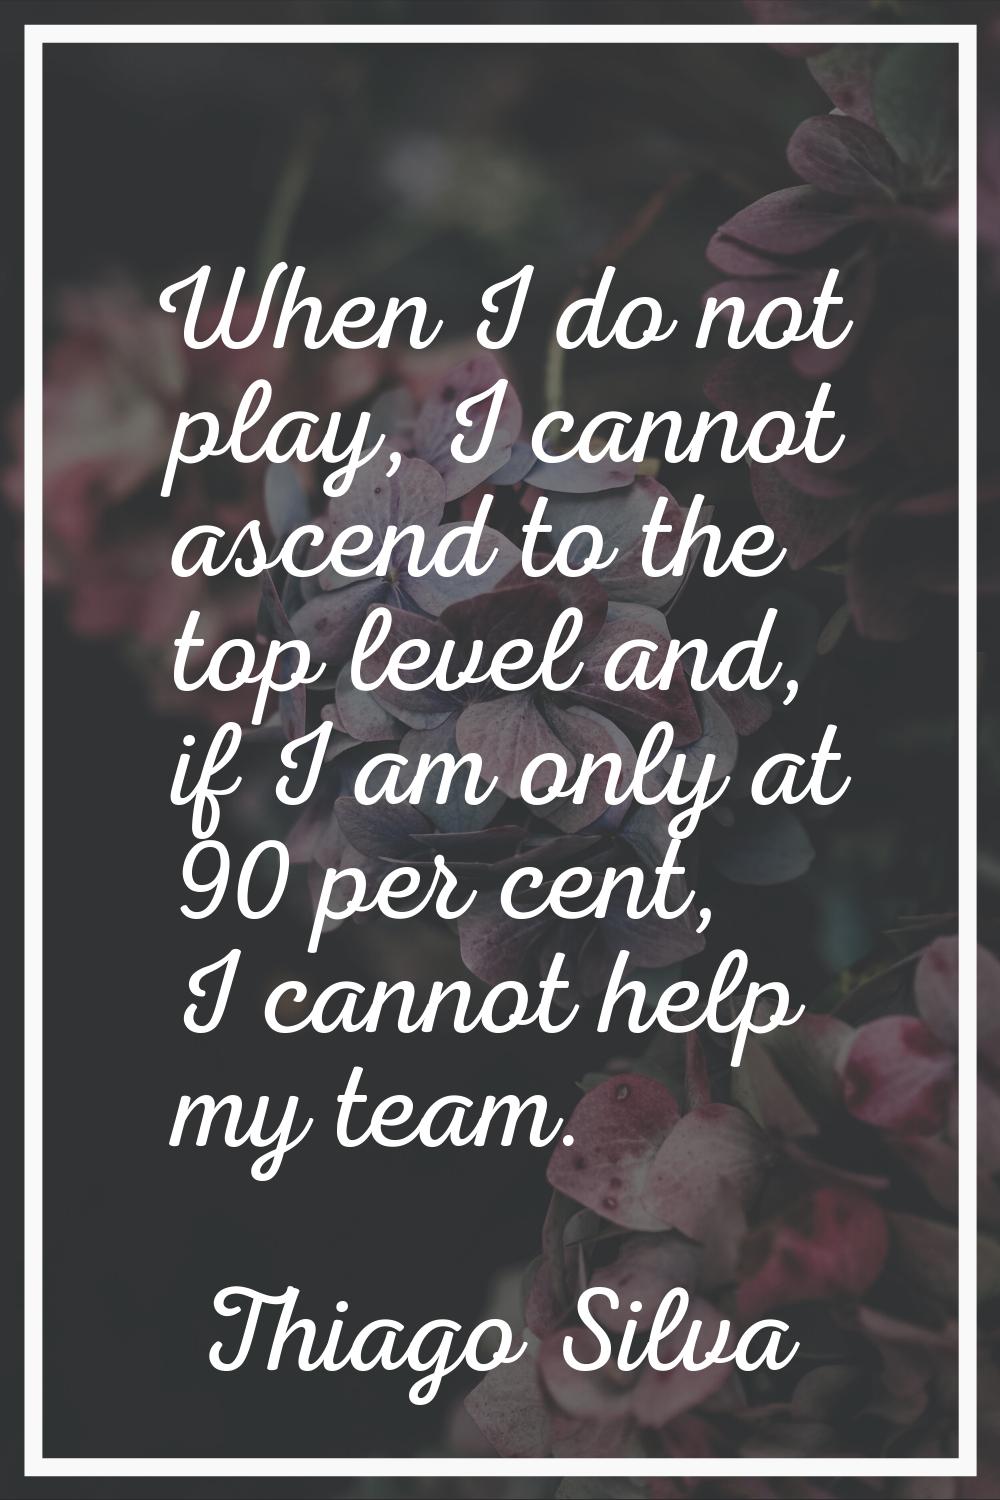 When I do not play, I cannot ascend to the top level and, if I am only at 90 per cent, I cannot hel